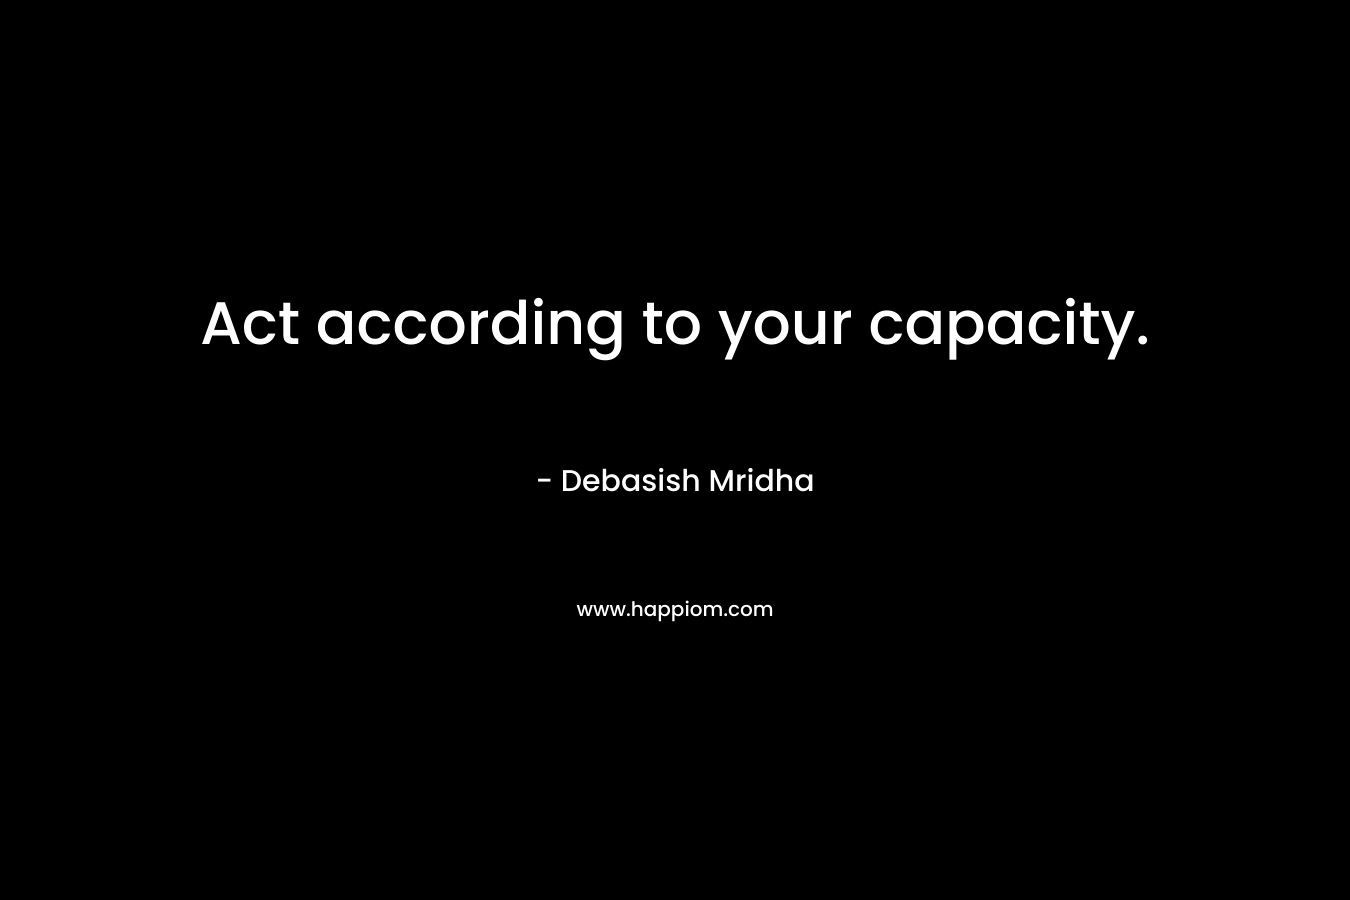 Act according to your capacity.